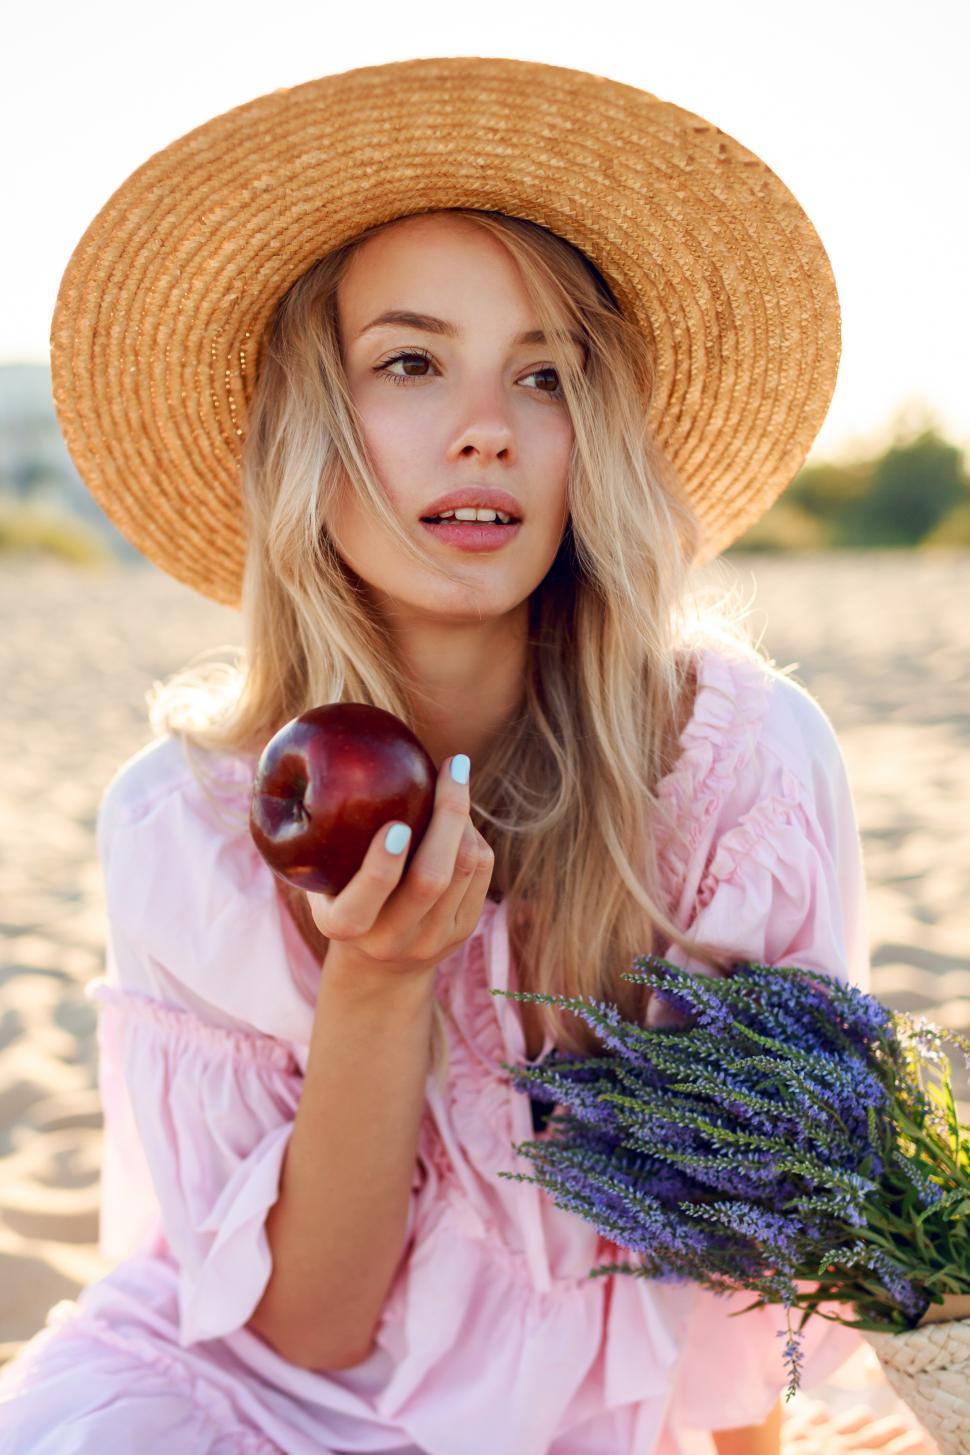 Free Image of Close up portrait of blonde girl in straw hat enjoying vacation 